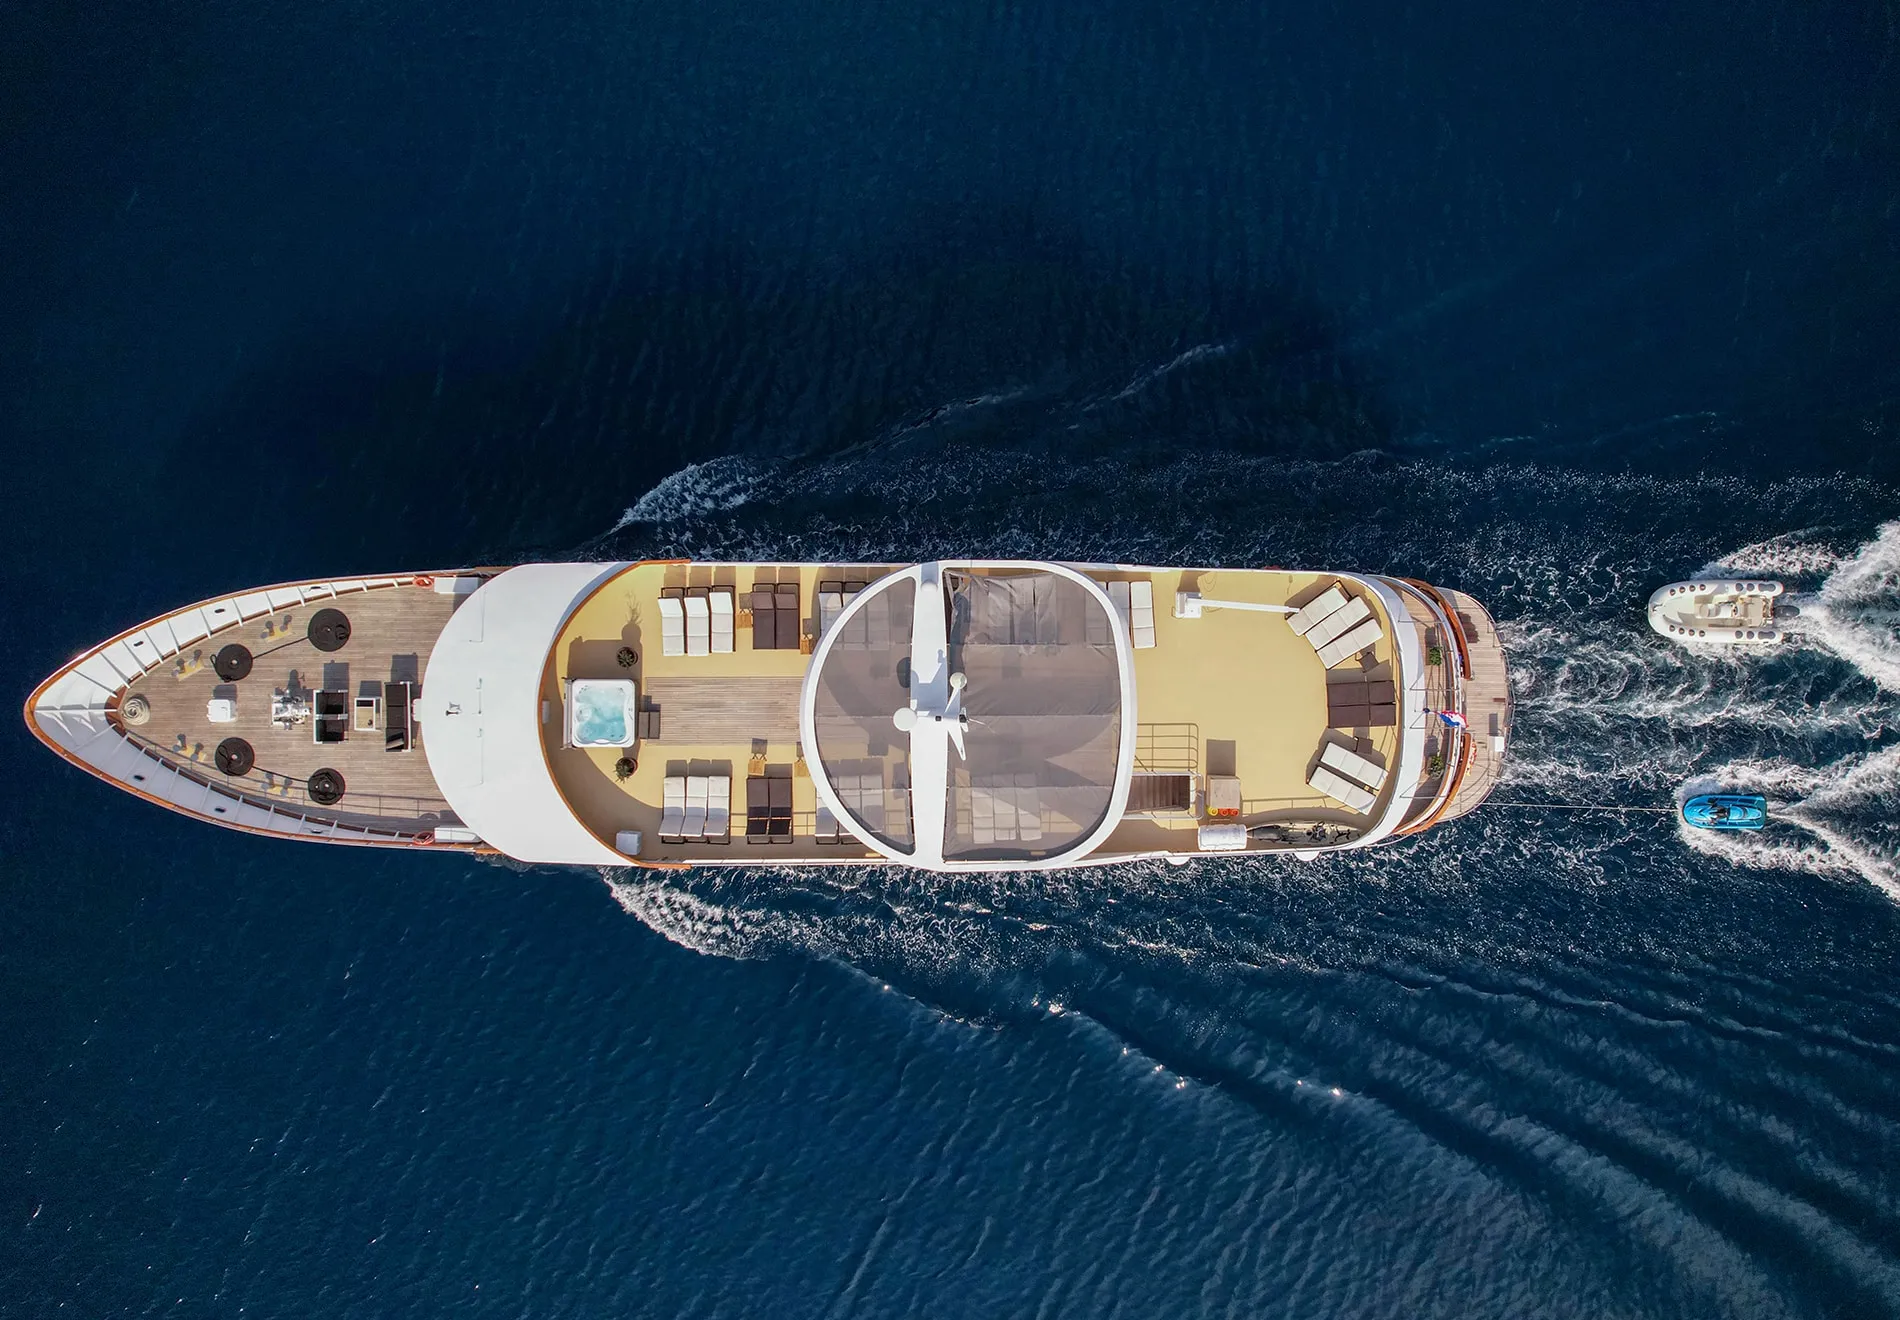 Your journey of an unforgettable yacht charter starts here